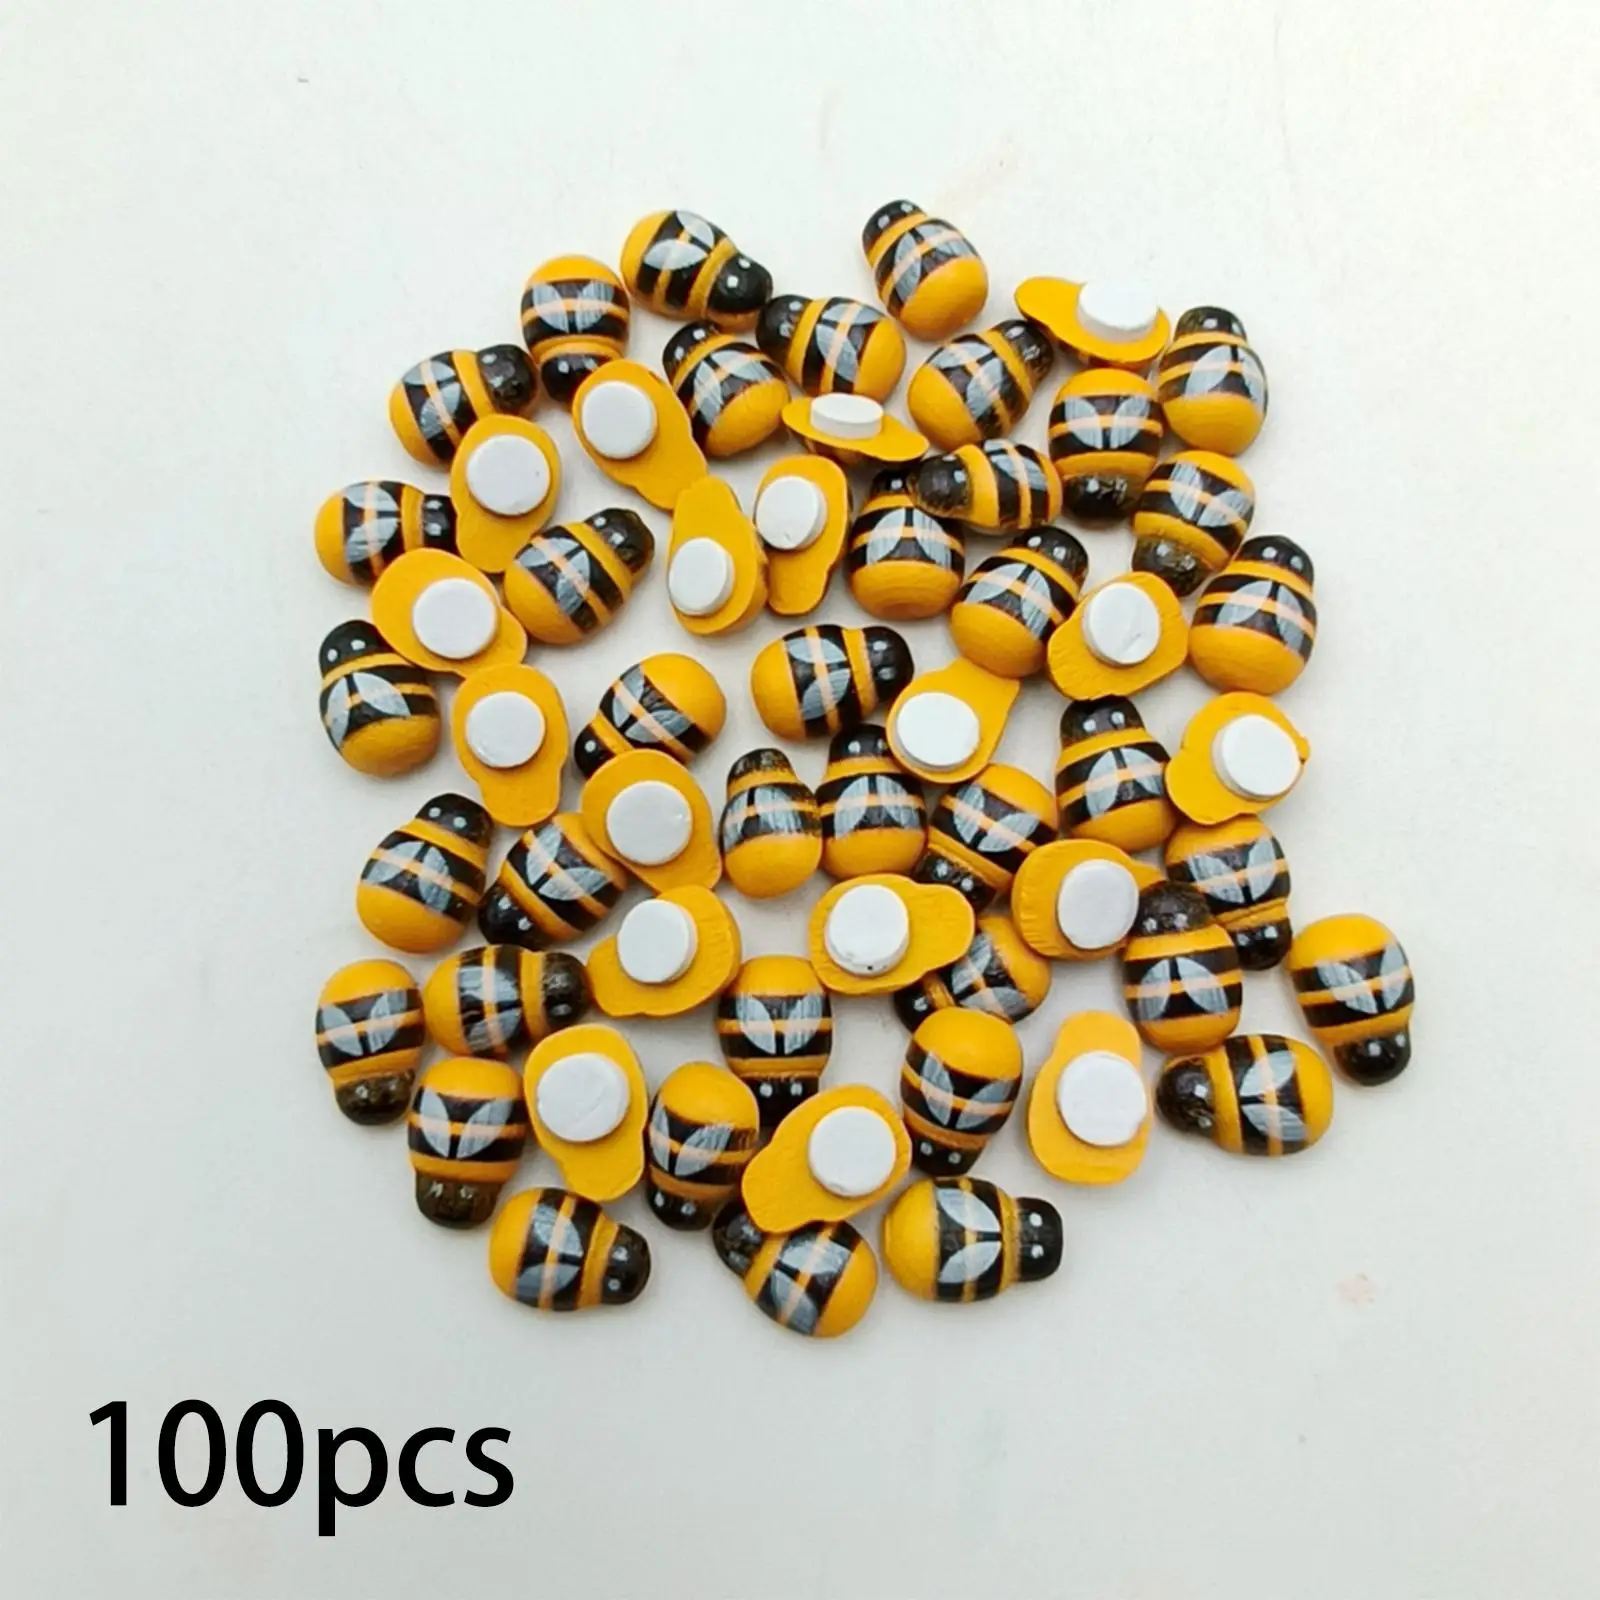 100x Bees Stickers for Crafts Scrapbook Handicrafts Flatback Embellishment for Card Making Hair Bow Center Craft Jewelry Making